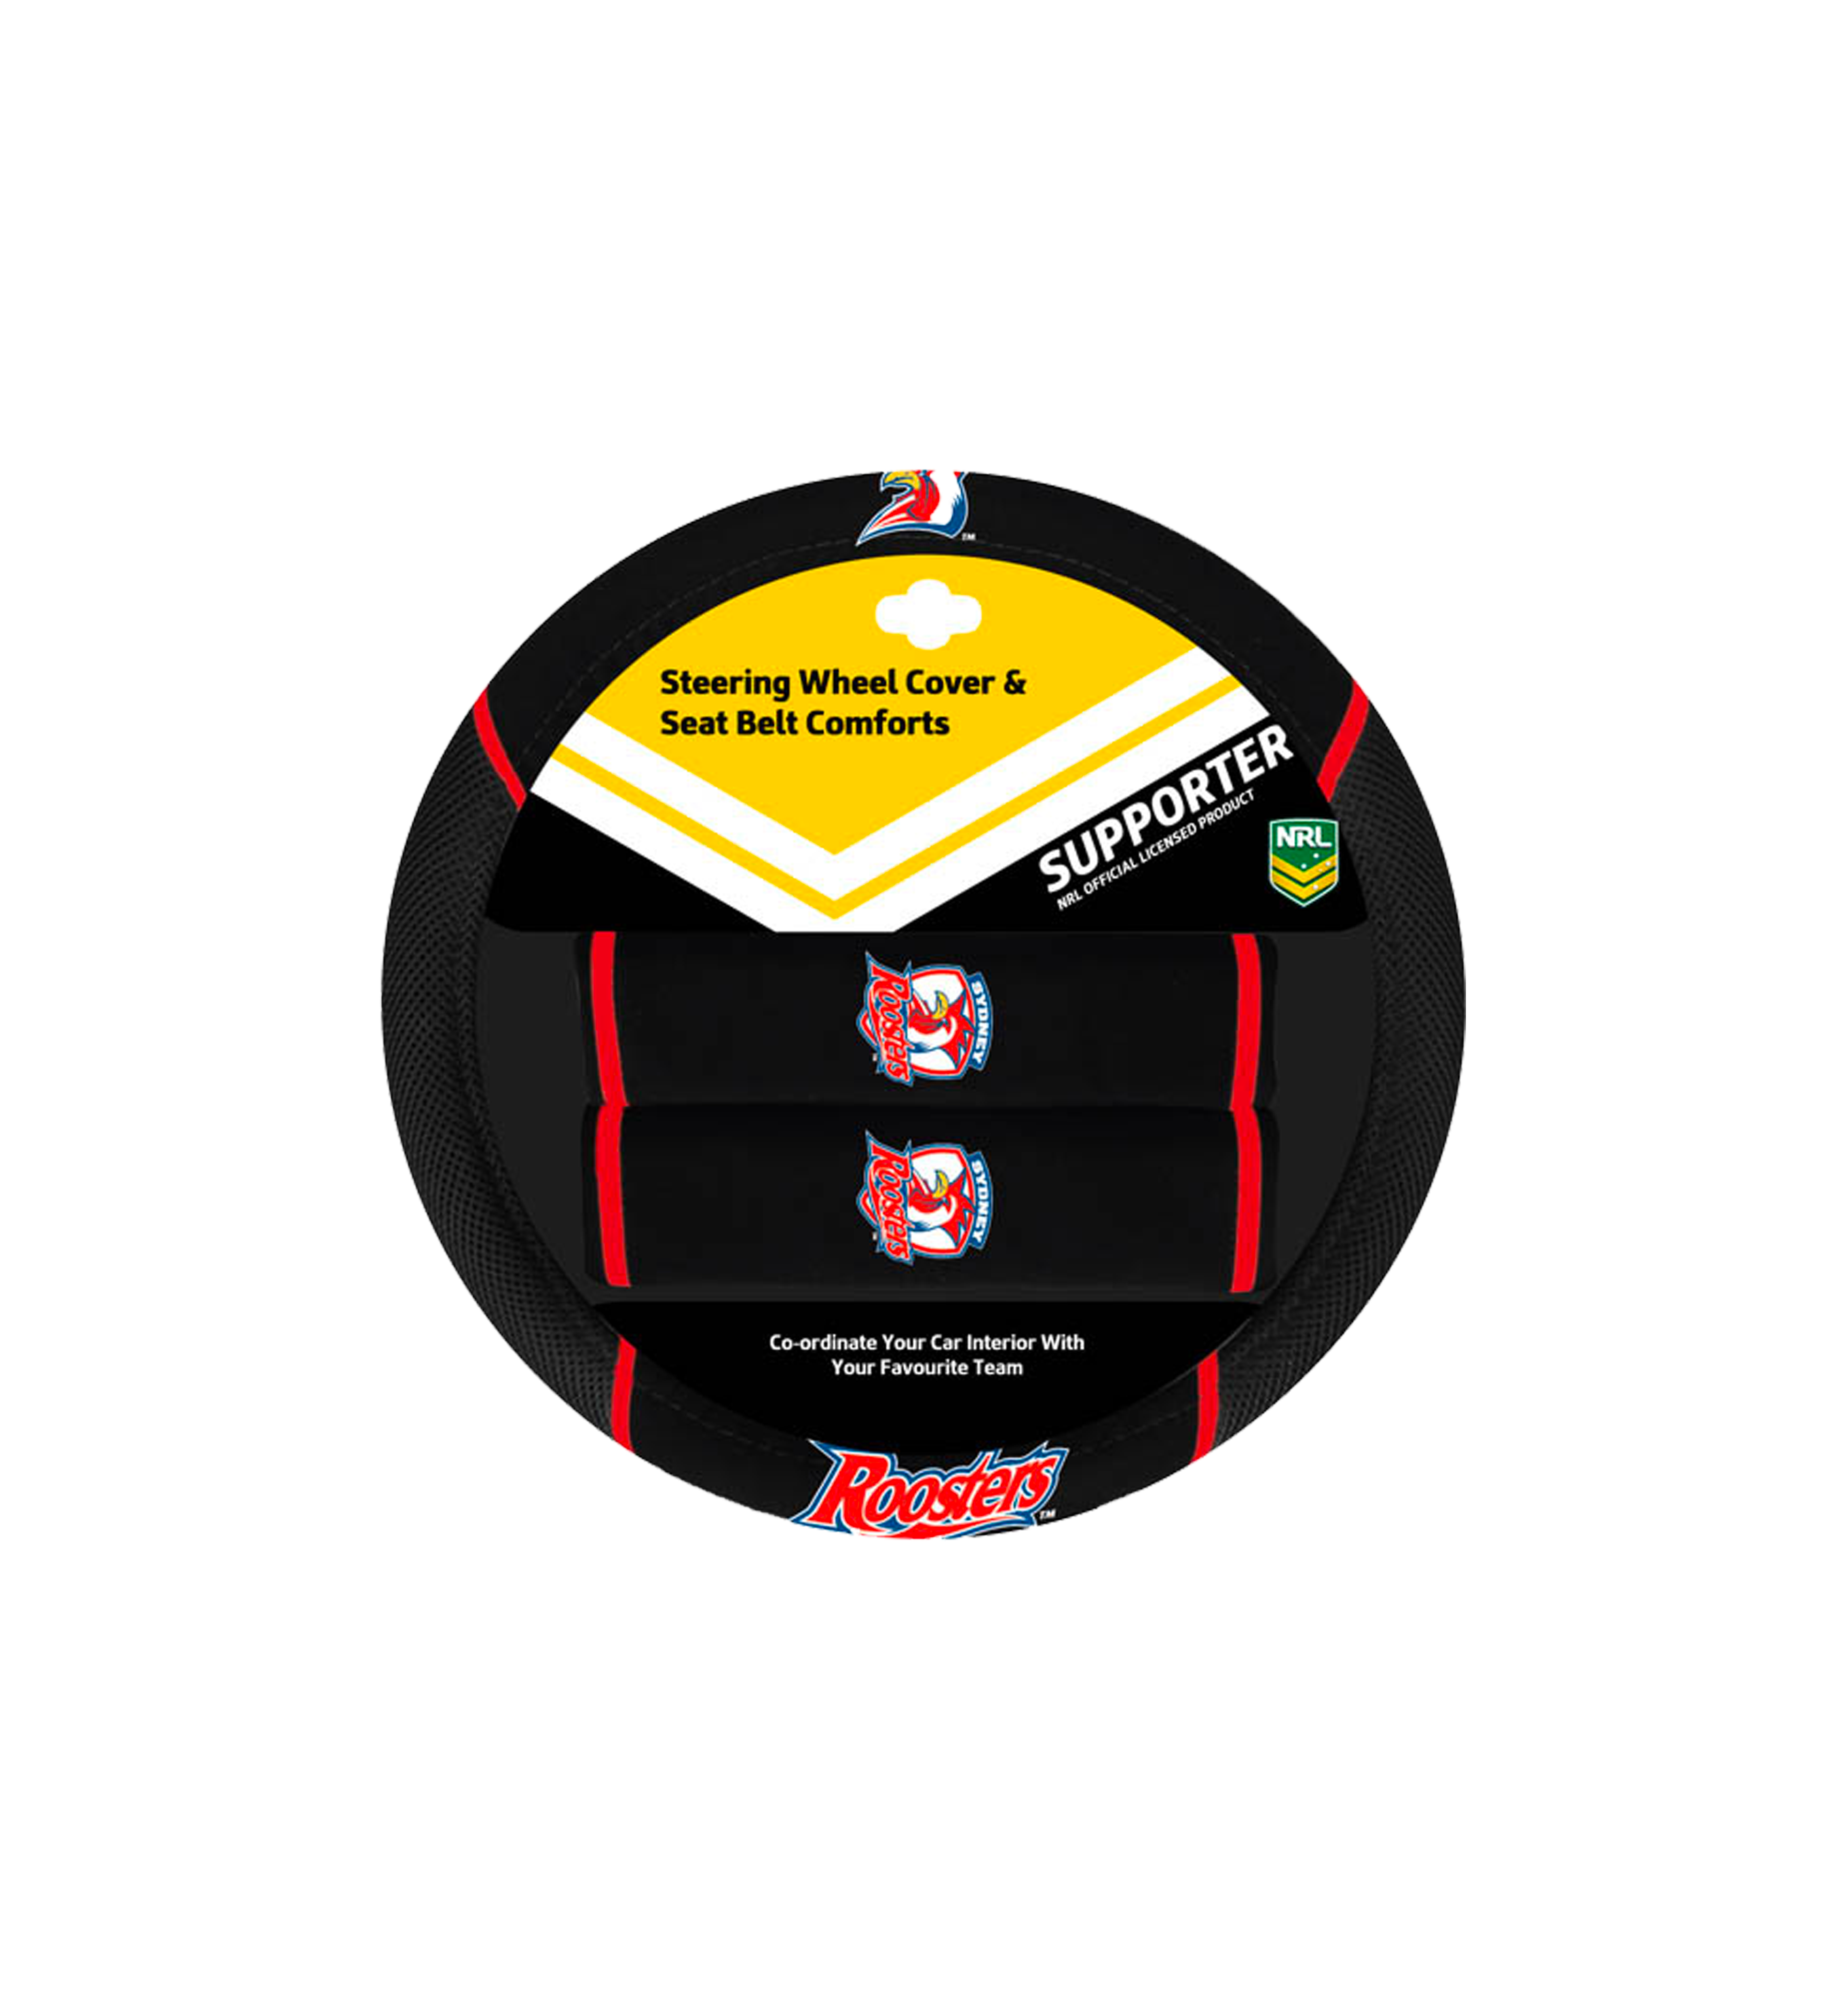 Sydney Roosters Steering Wheel Cover And Seat Belt Comforts Set